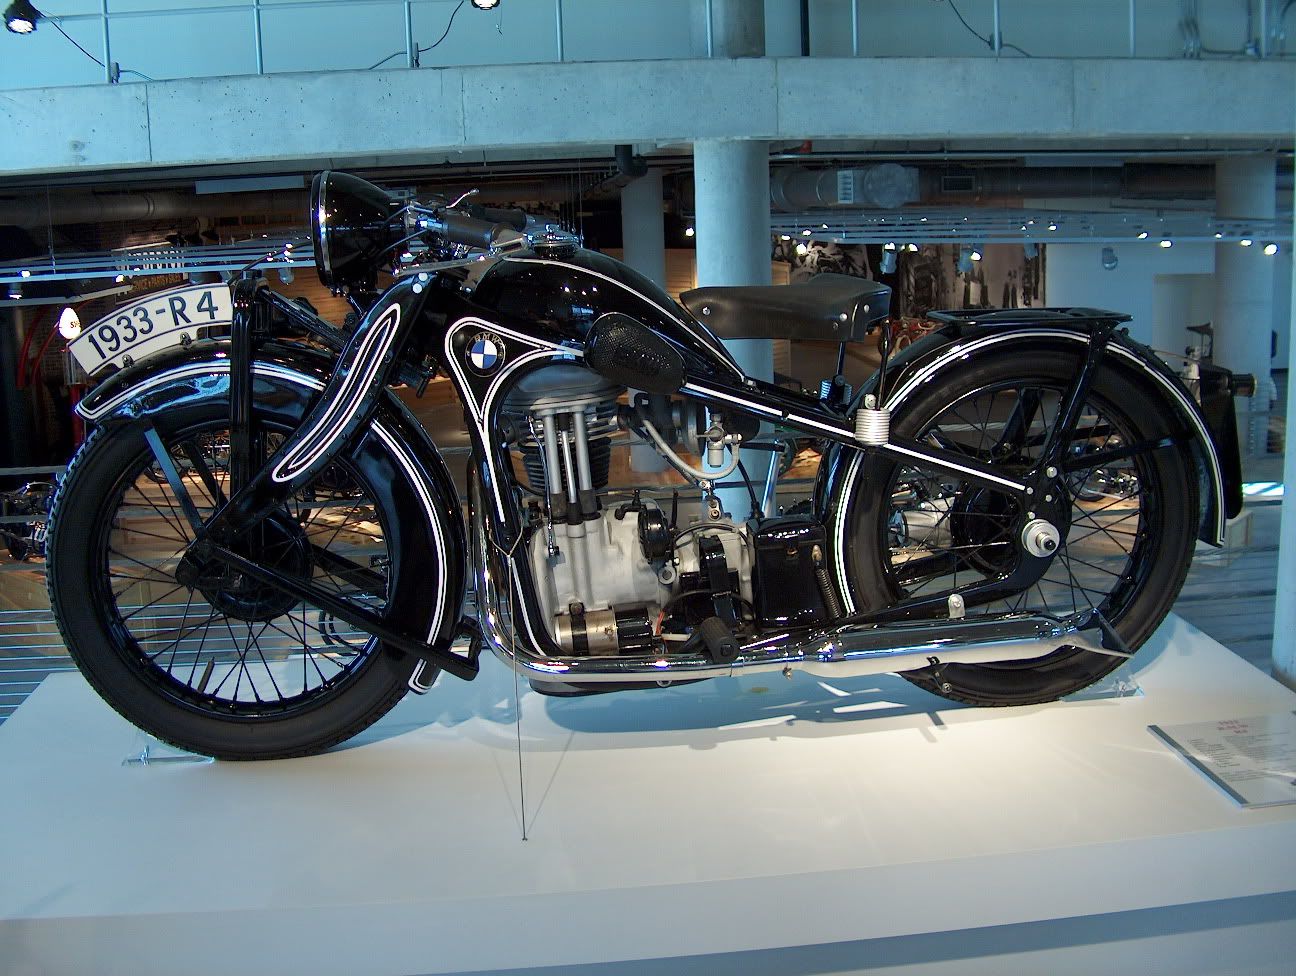 1933 Bmw motorcycles #4